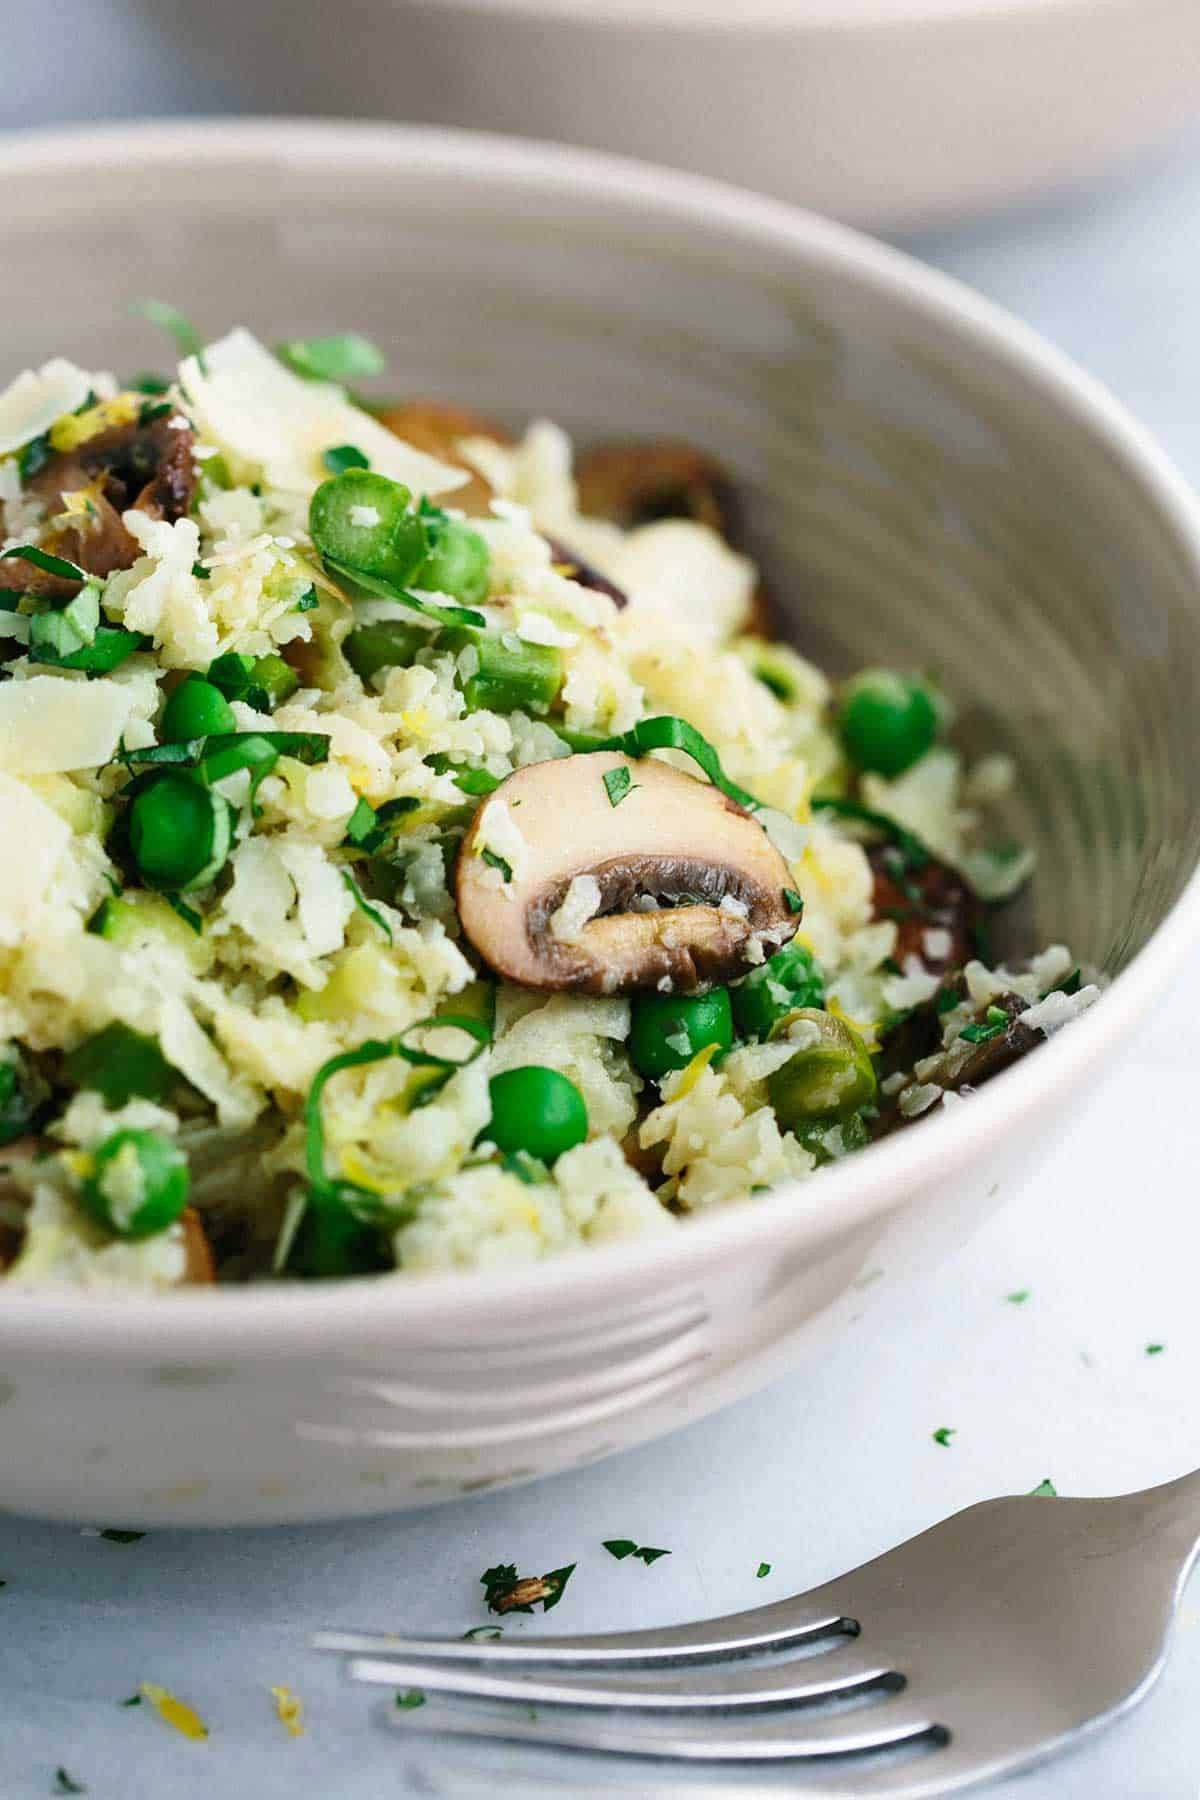 Healthy Risotto Recipes
 Low Carb Cauliflower Risotto Recipe with Mushrooms